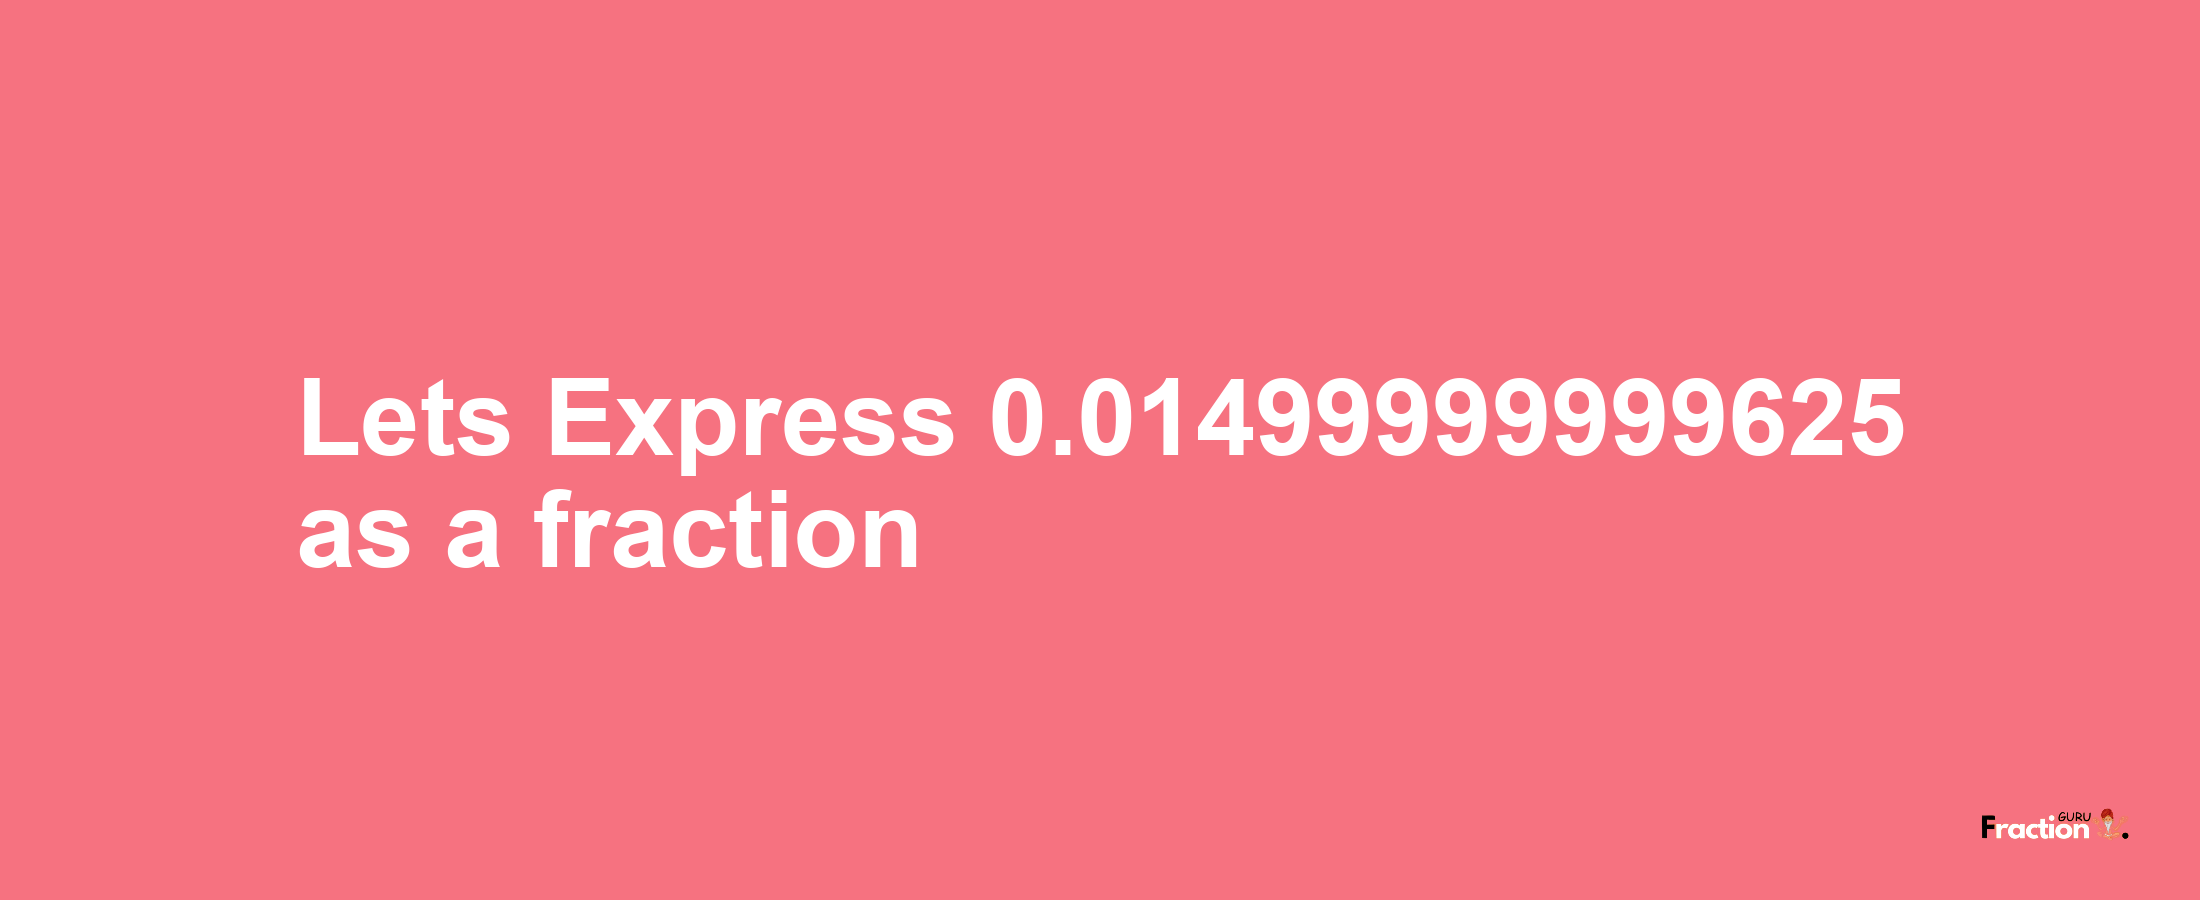 Lets Express 0.01499999999625 as afraction